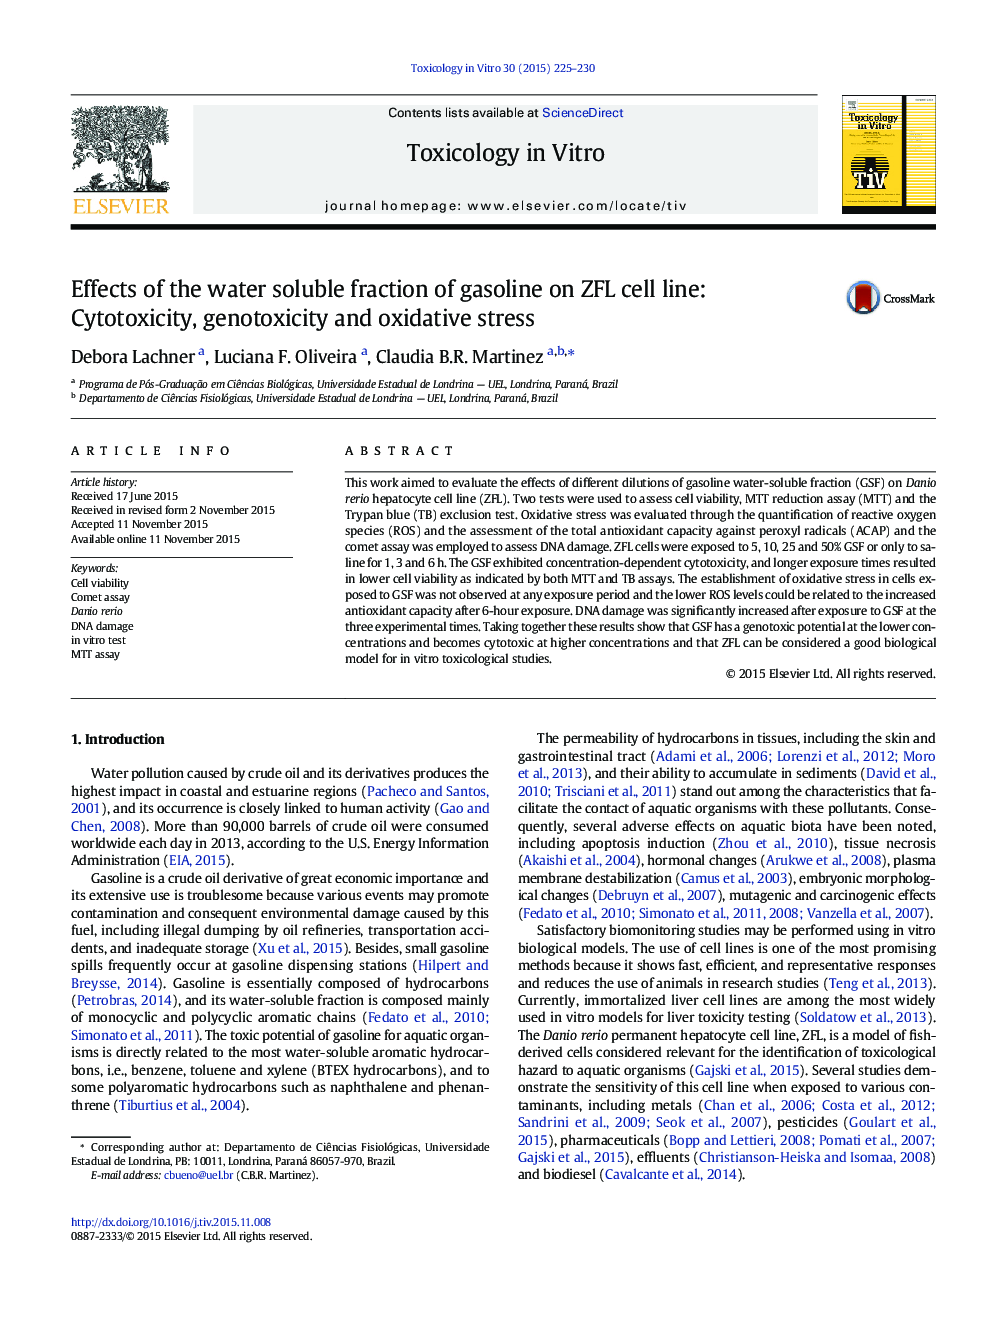 Effects of the water soluble fraction of gasoline on ZFL cell line: Cytotoxicity, genotoxicity and oxidative stress